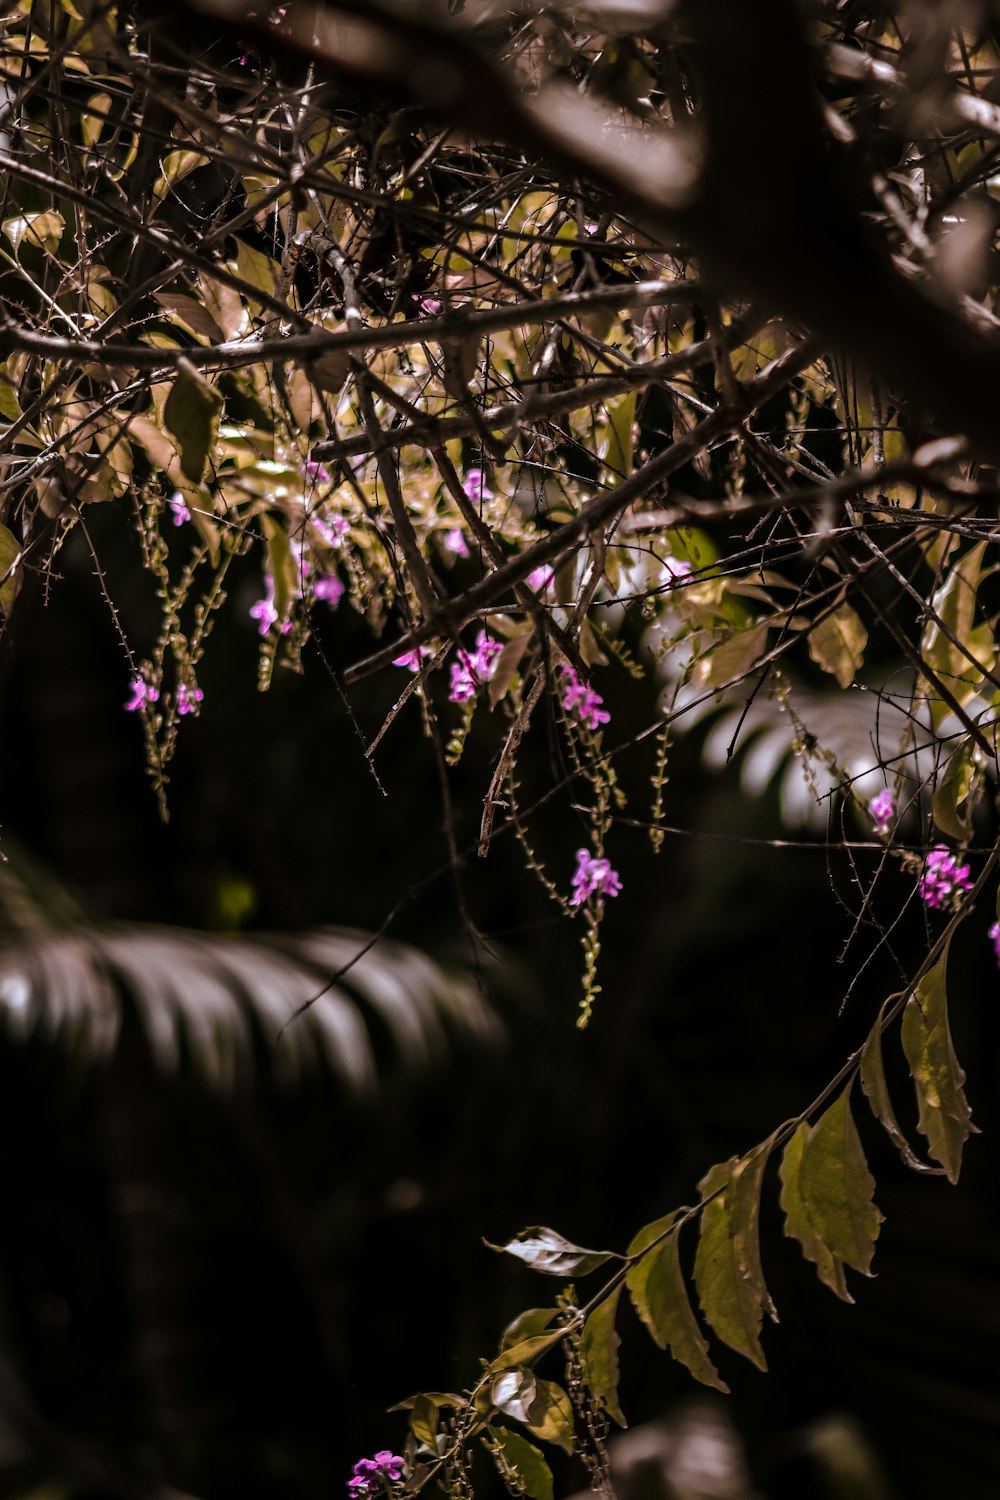 a branch with purple flowers hanging from it